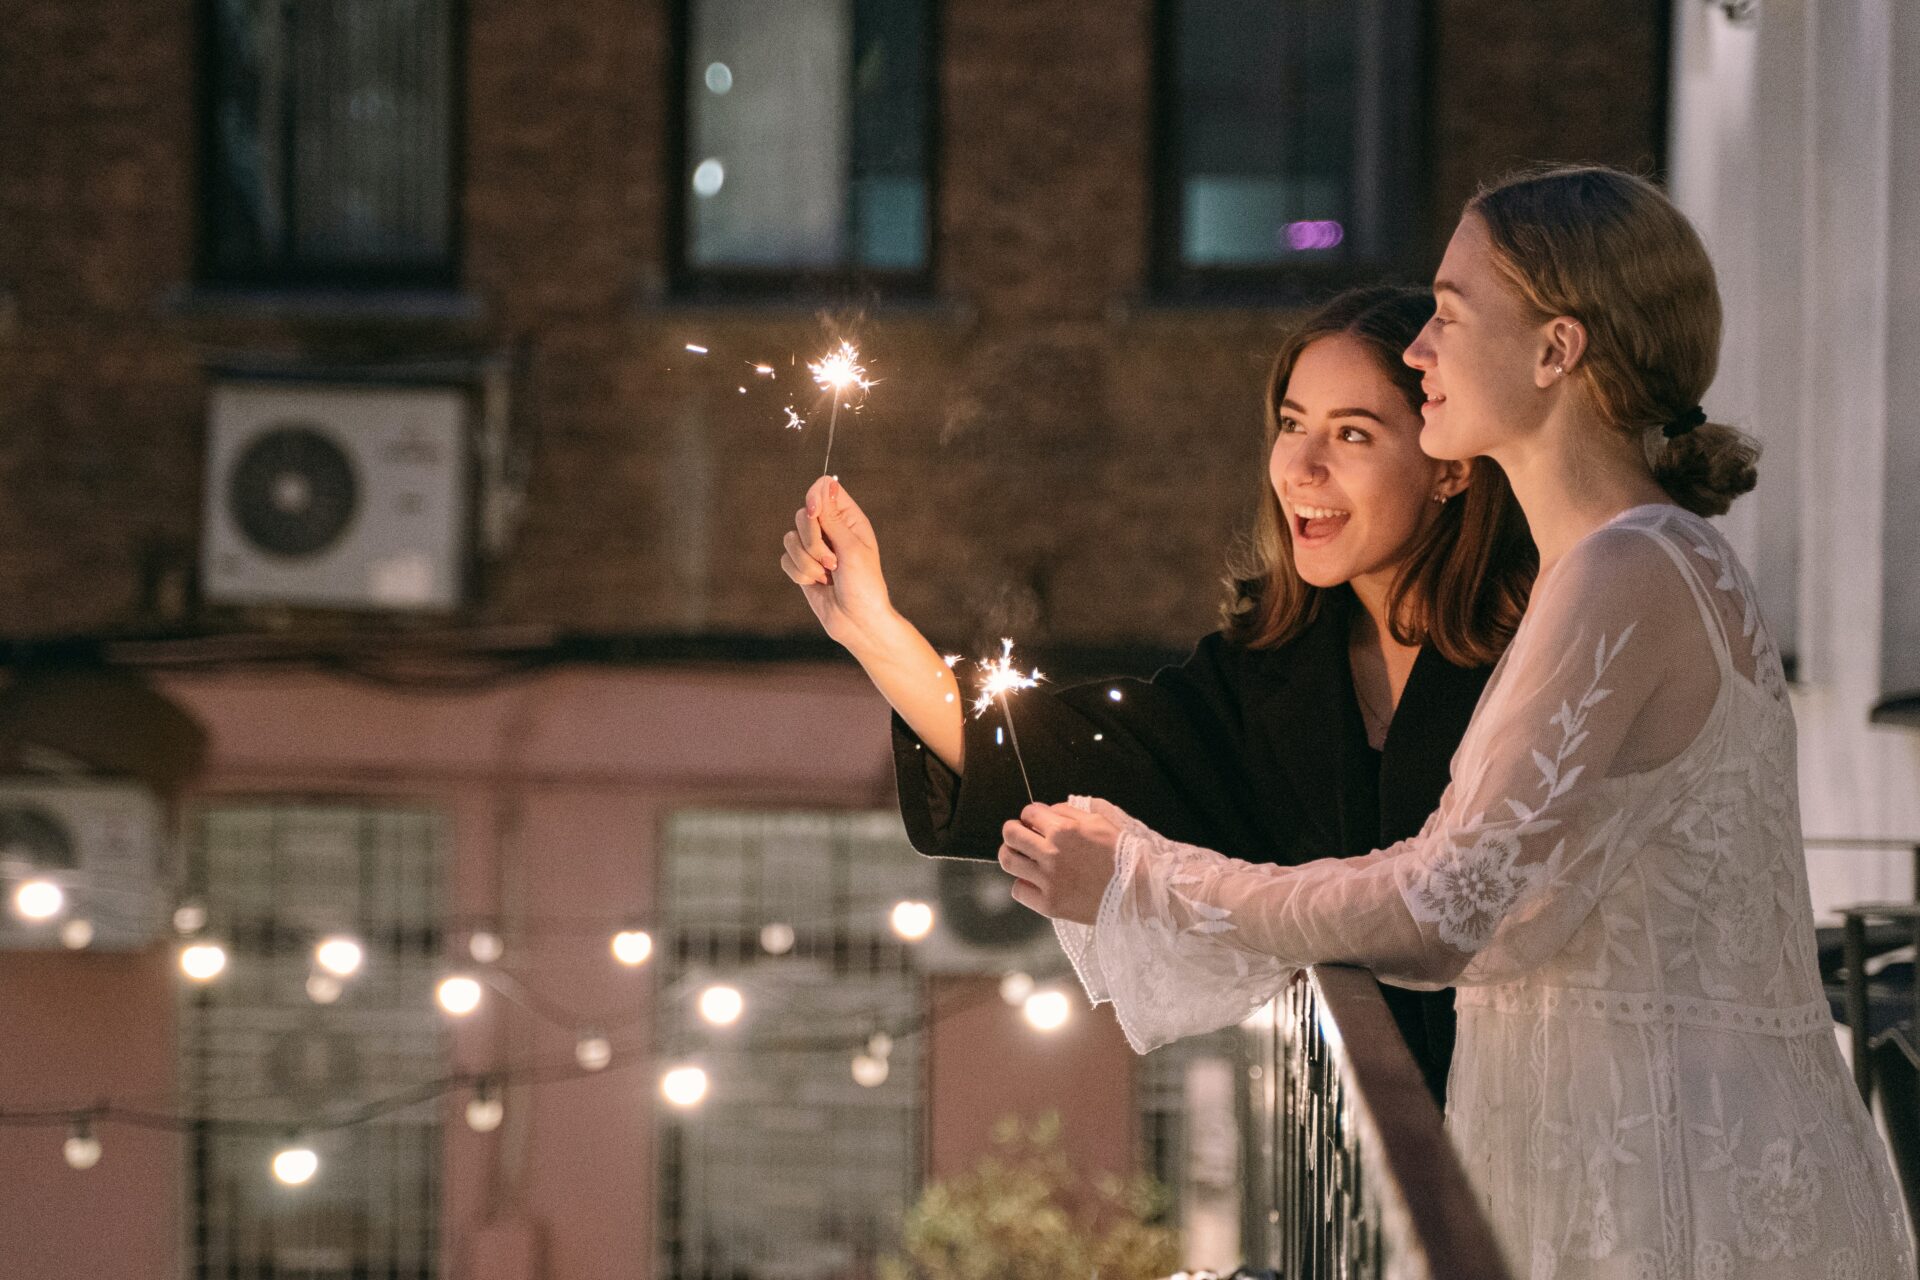 Two brides standing on balcony with cafe lights below